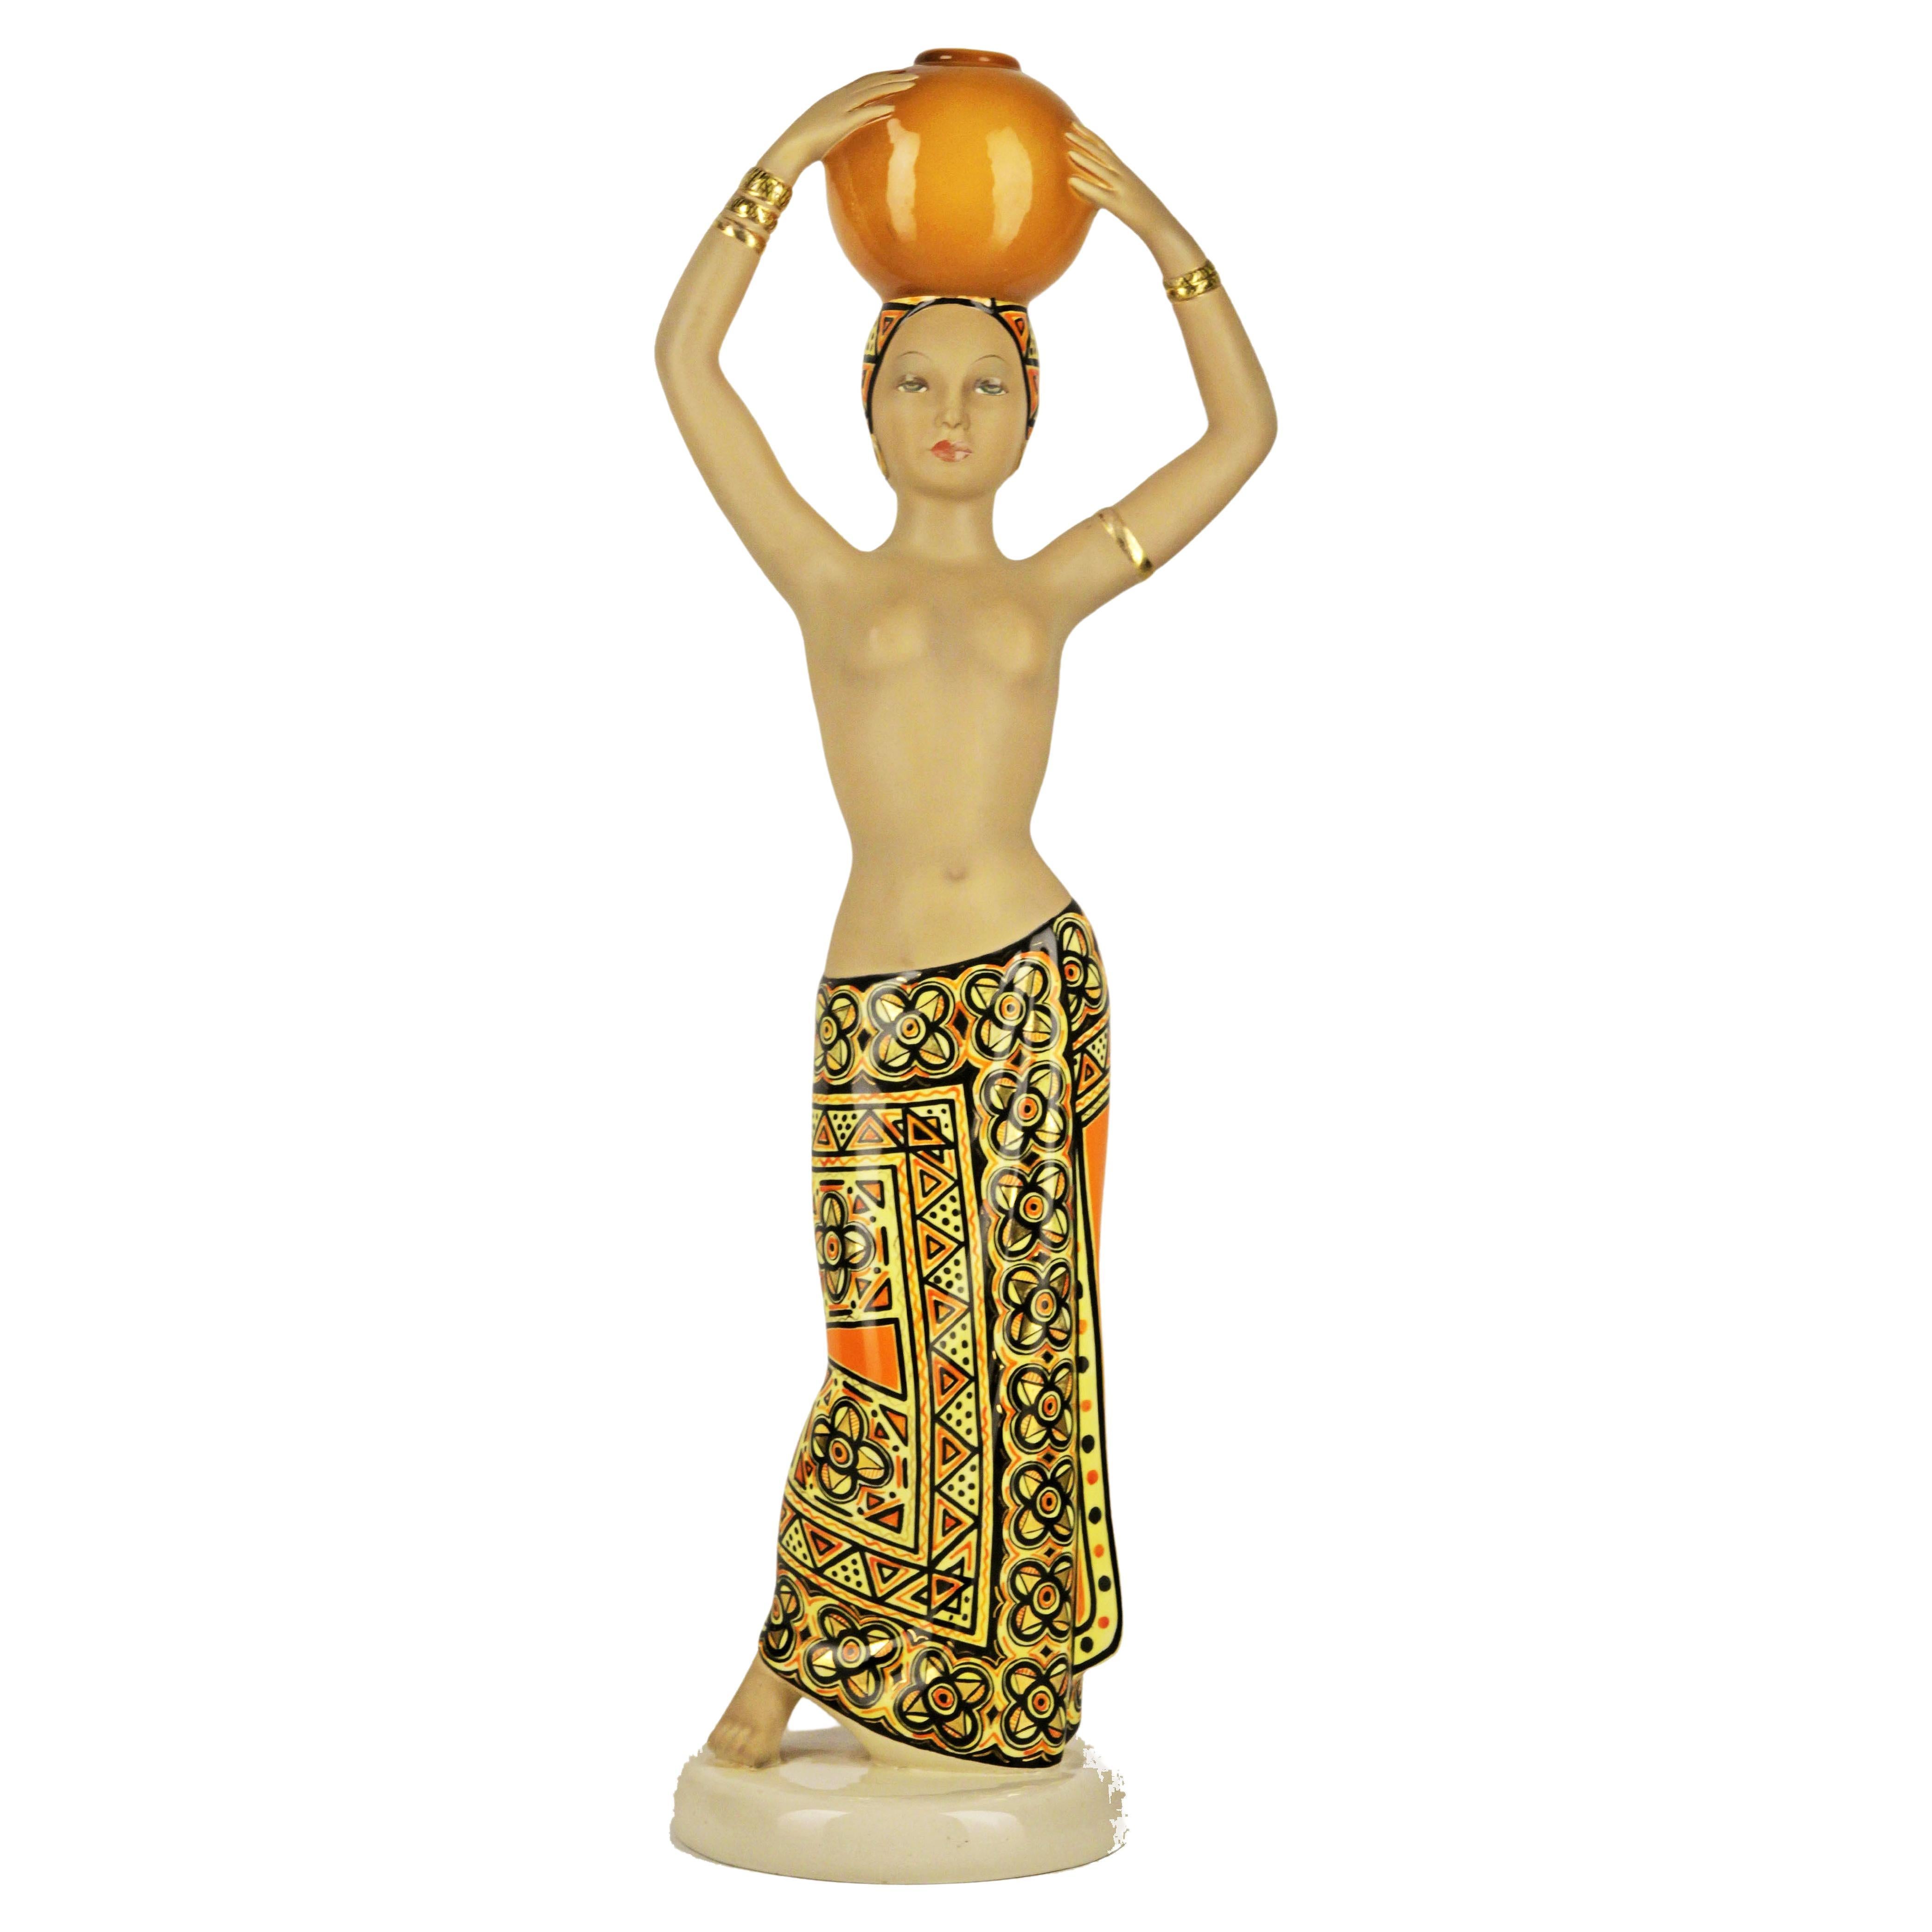 Mid-20th Century Torino Ceramic Sculpture 'Portatrice Africana' by C.I.A. Manna For Sale